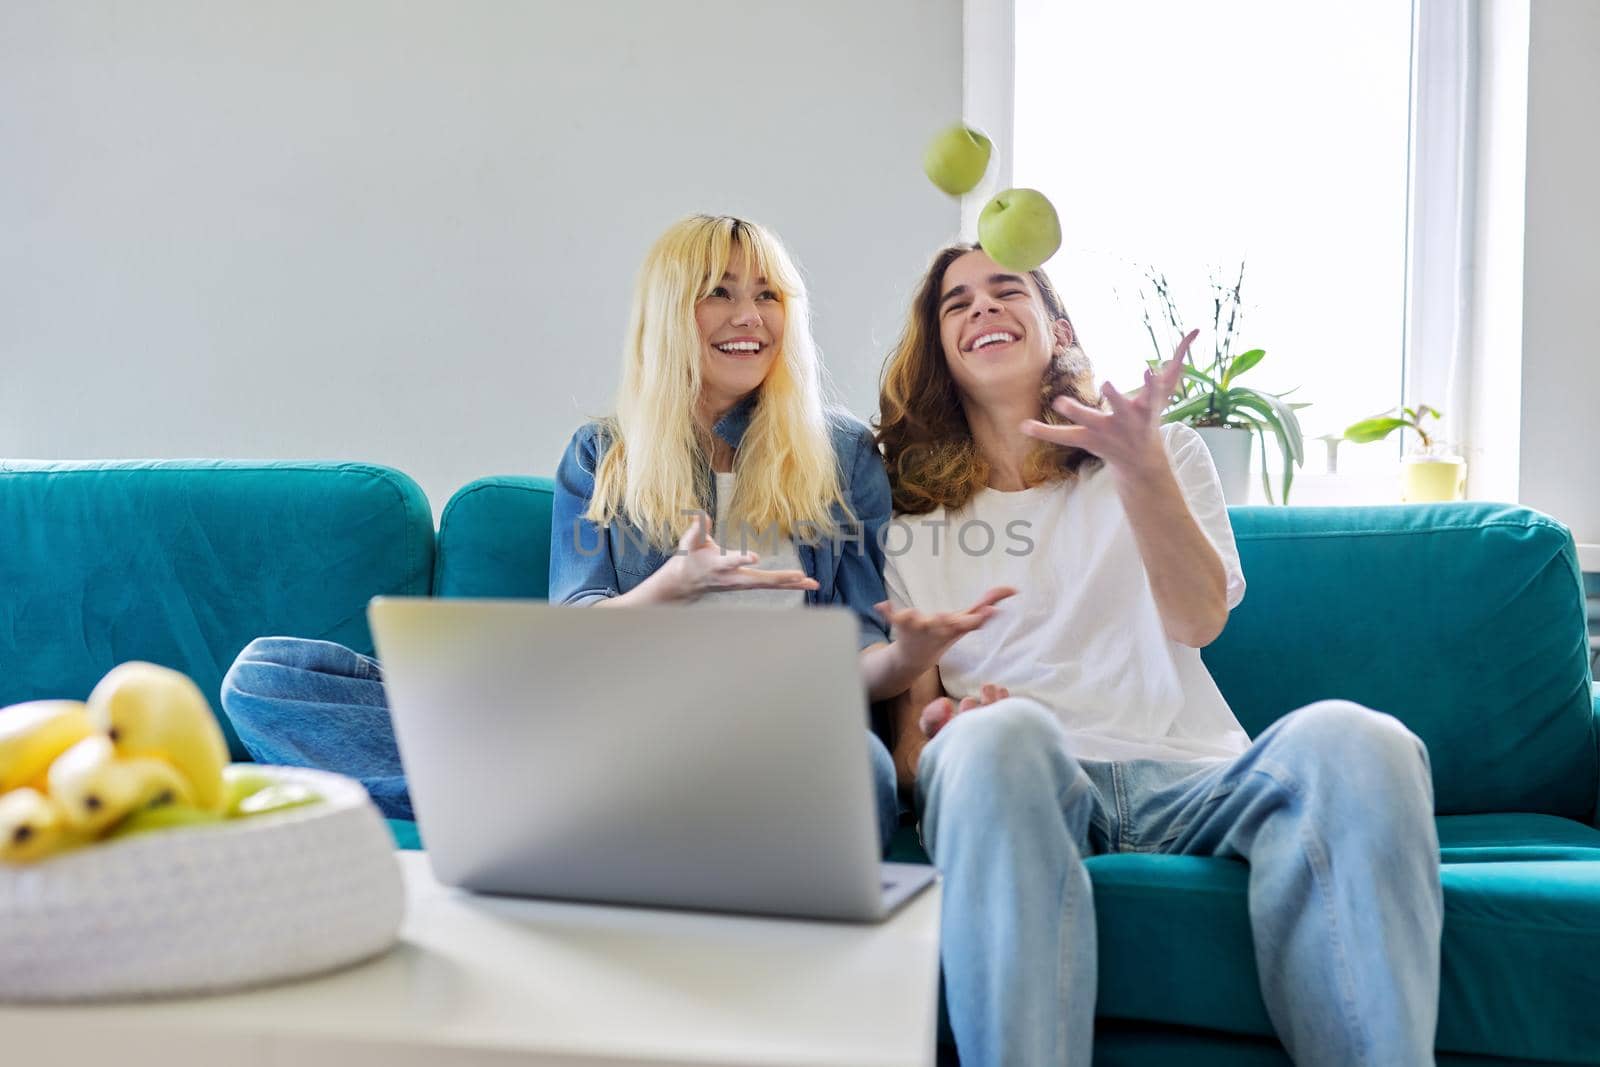 Laughing couple of teenagers having fun, sitting on couch, looking at laptop screen, with green apples in hands. Teens, youth, friendship, lifestyle, leisure concept